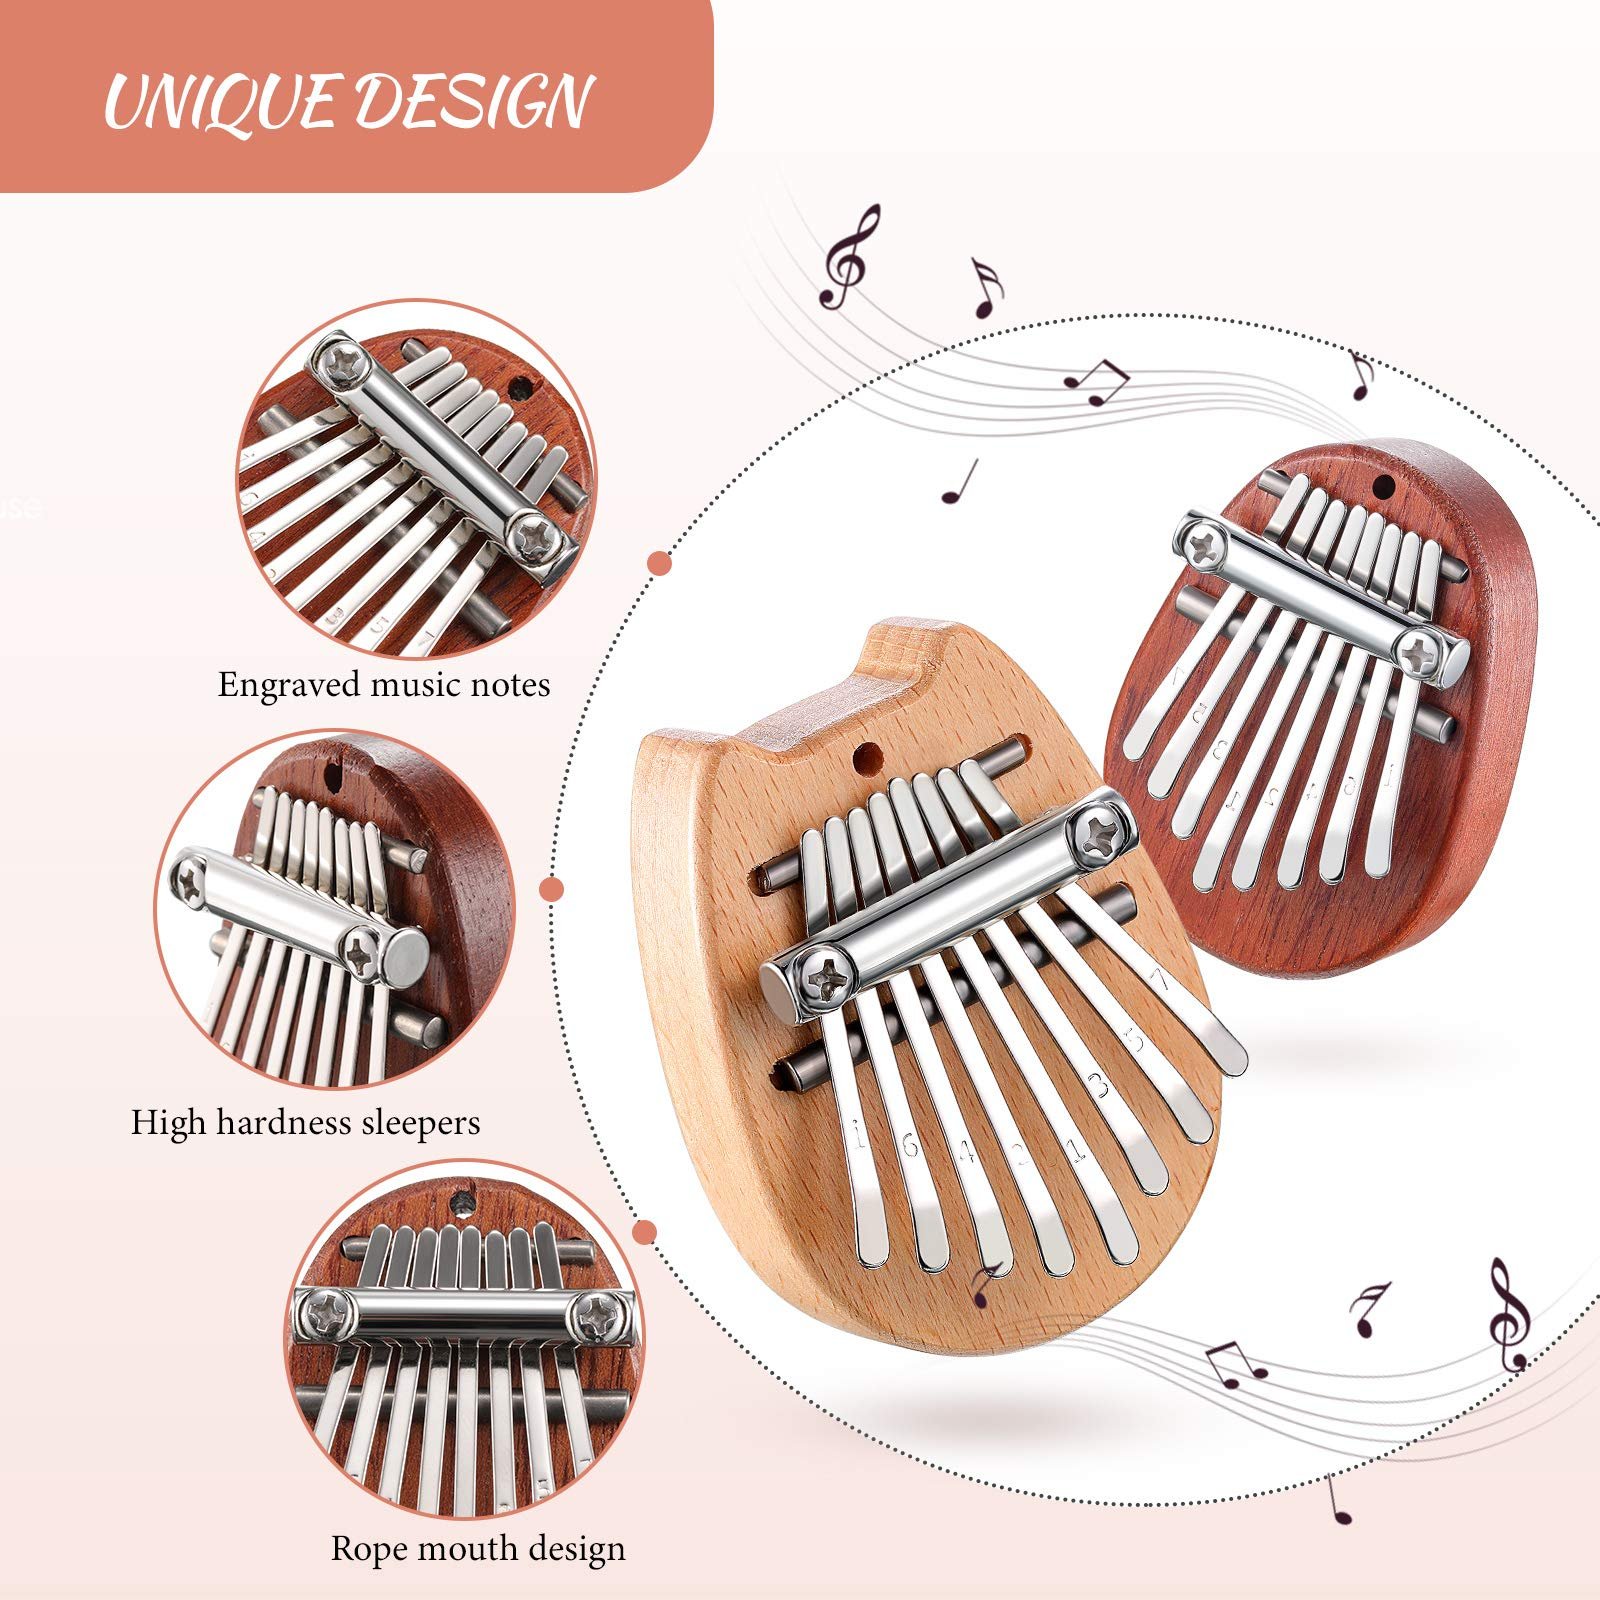 🎄Christmas is coming💕Kalimba 8 Key exquisite Finger Thumb Piano